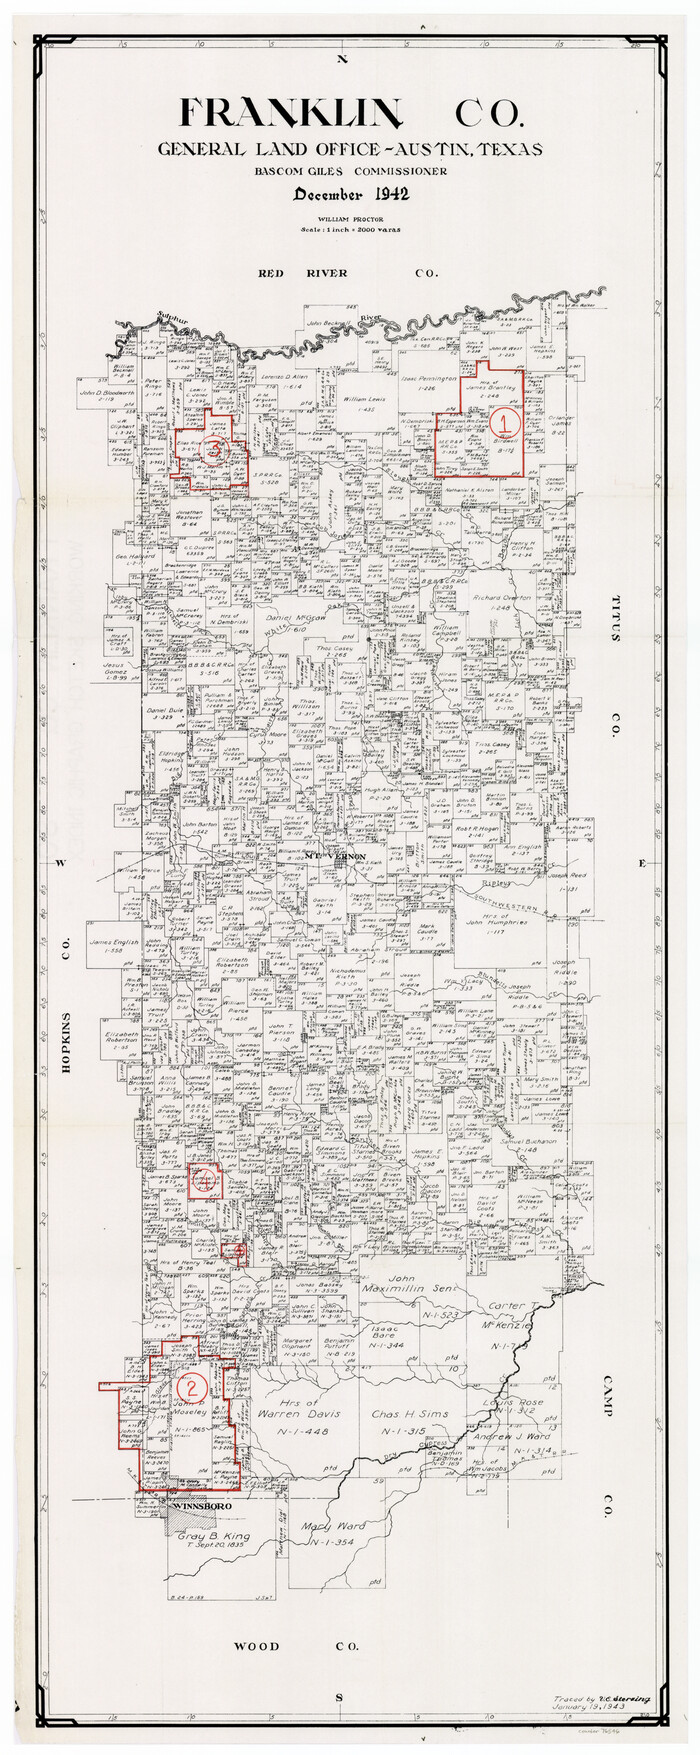 76546, Franklin County Working Sketch Graphic Index, General Map Collection